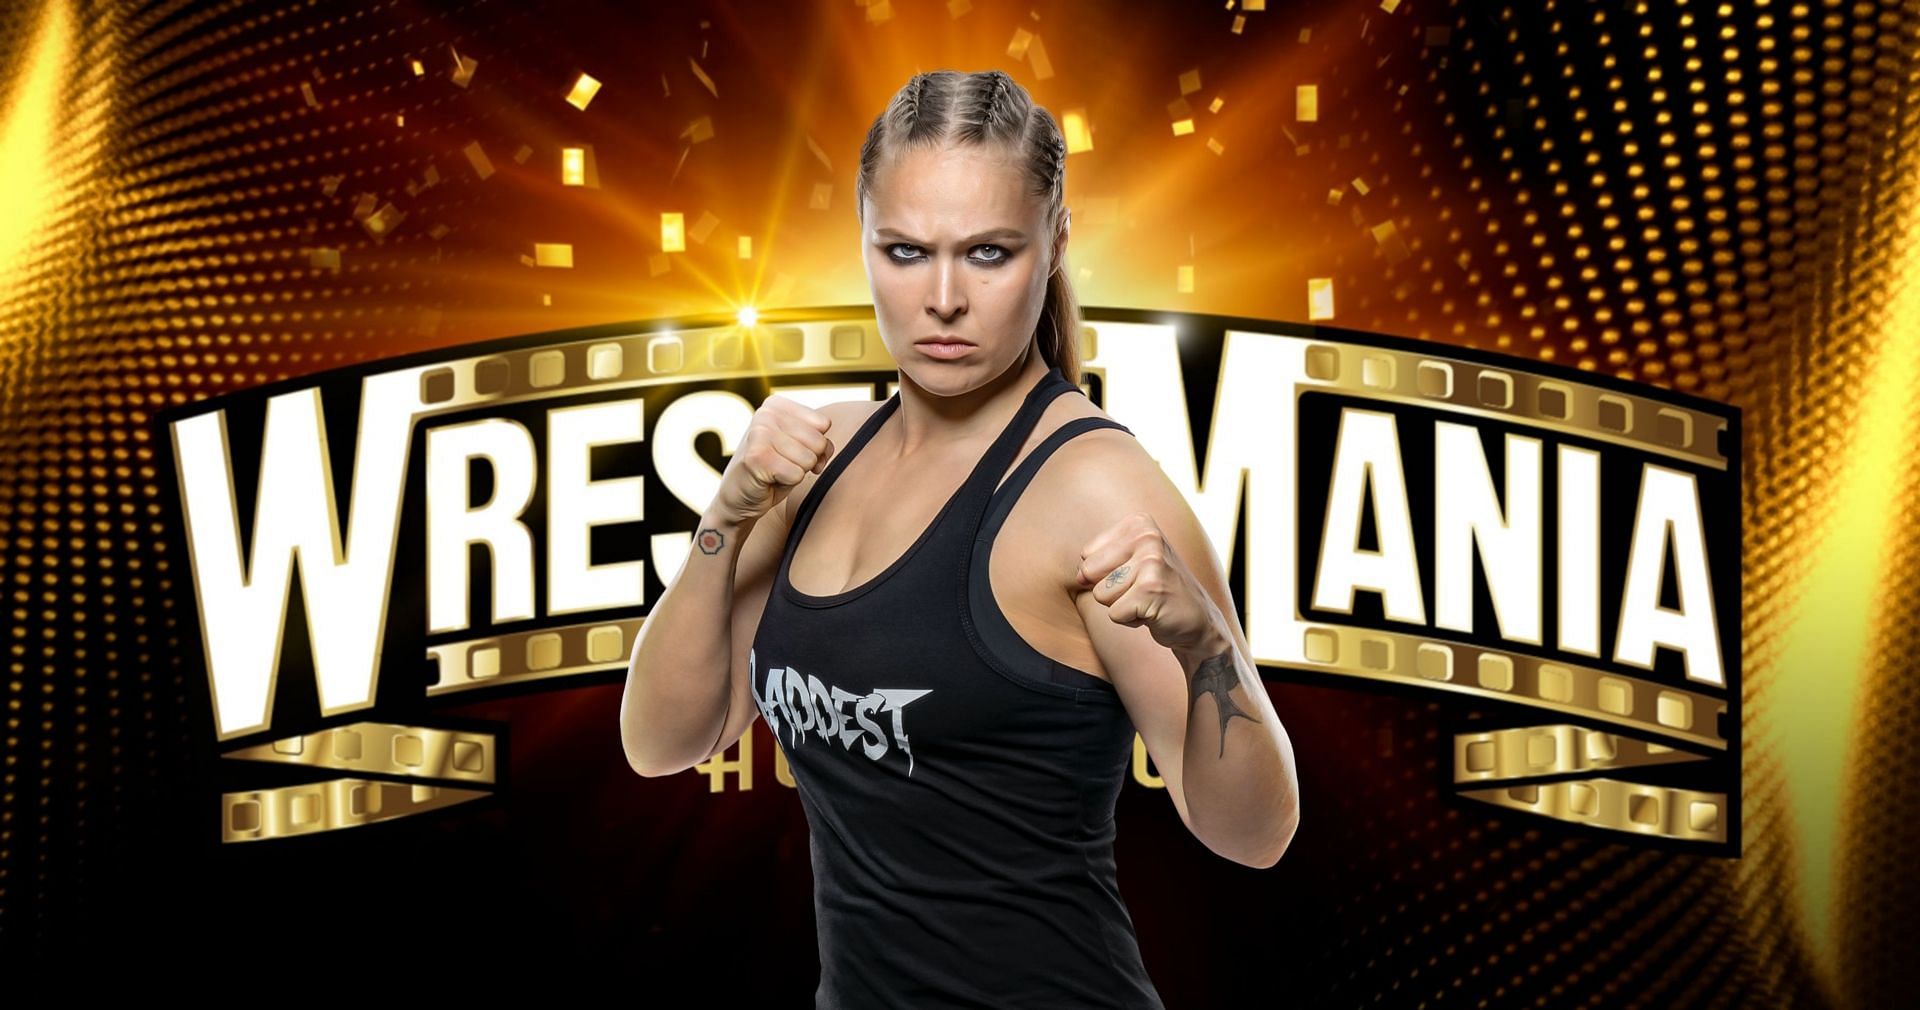 Ronda Rousey is one of WWE